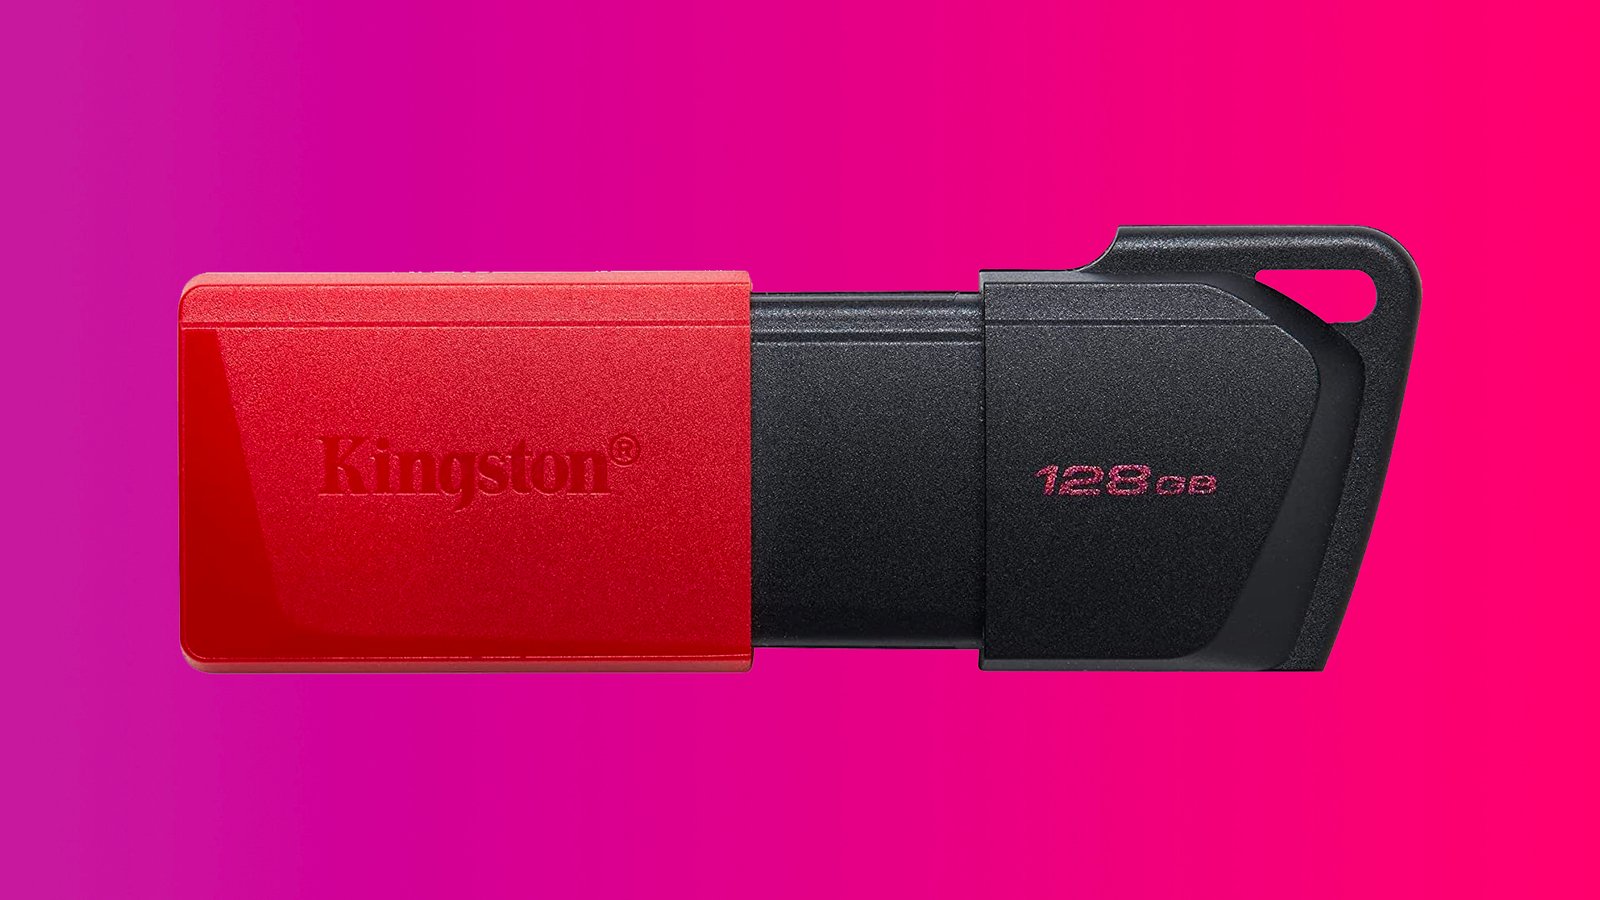 This 128GB drive is just £6 at Amazon |